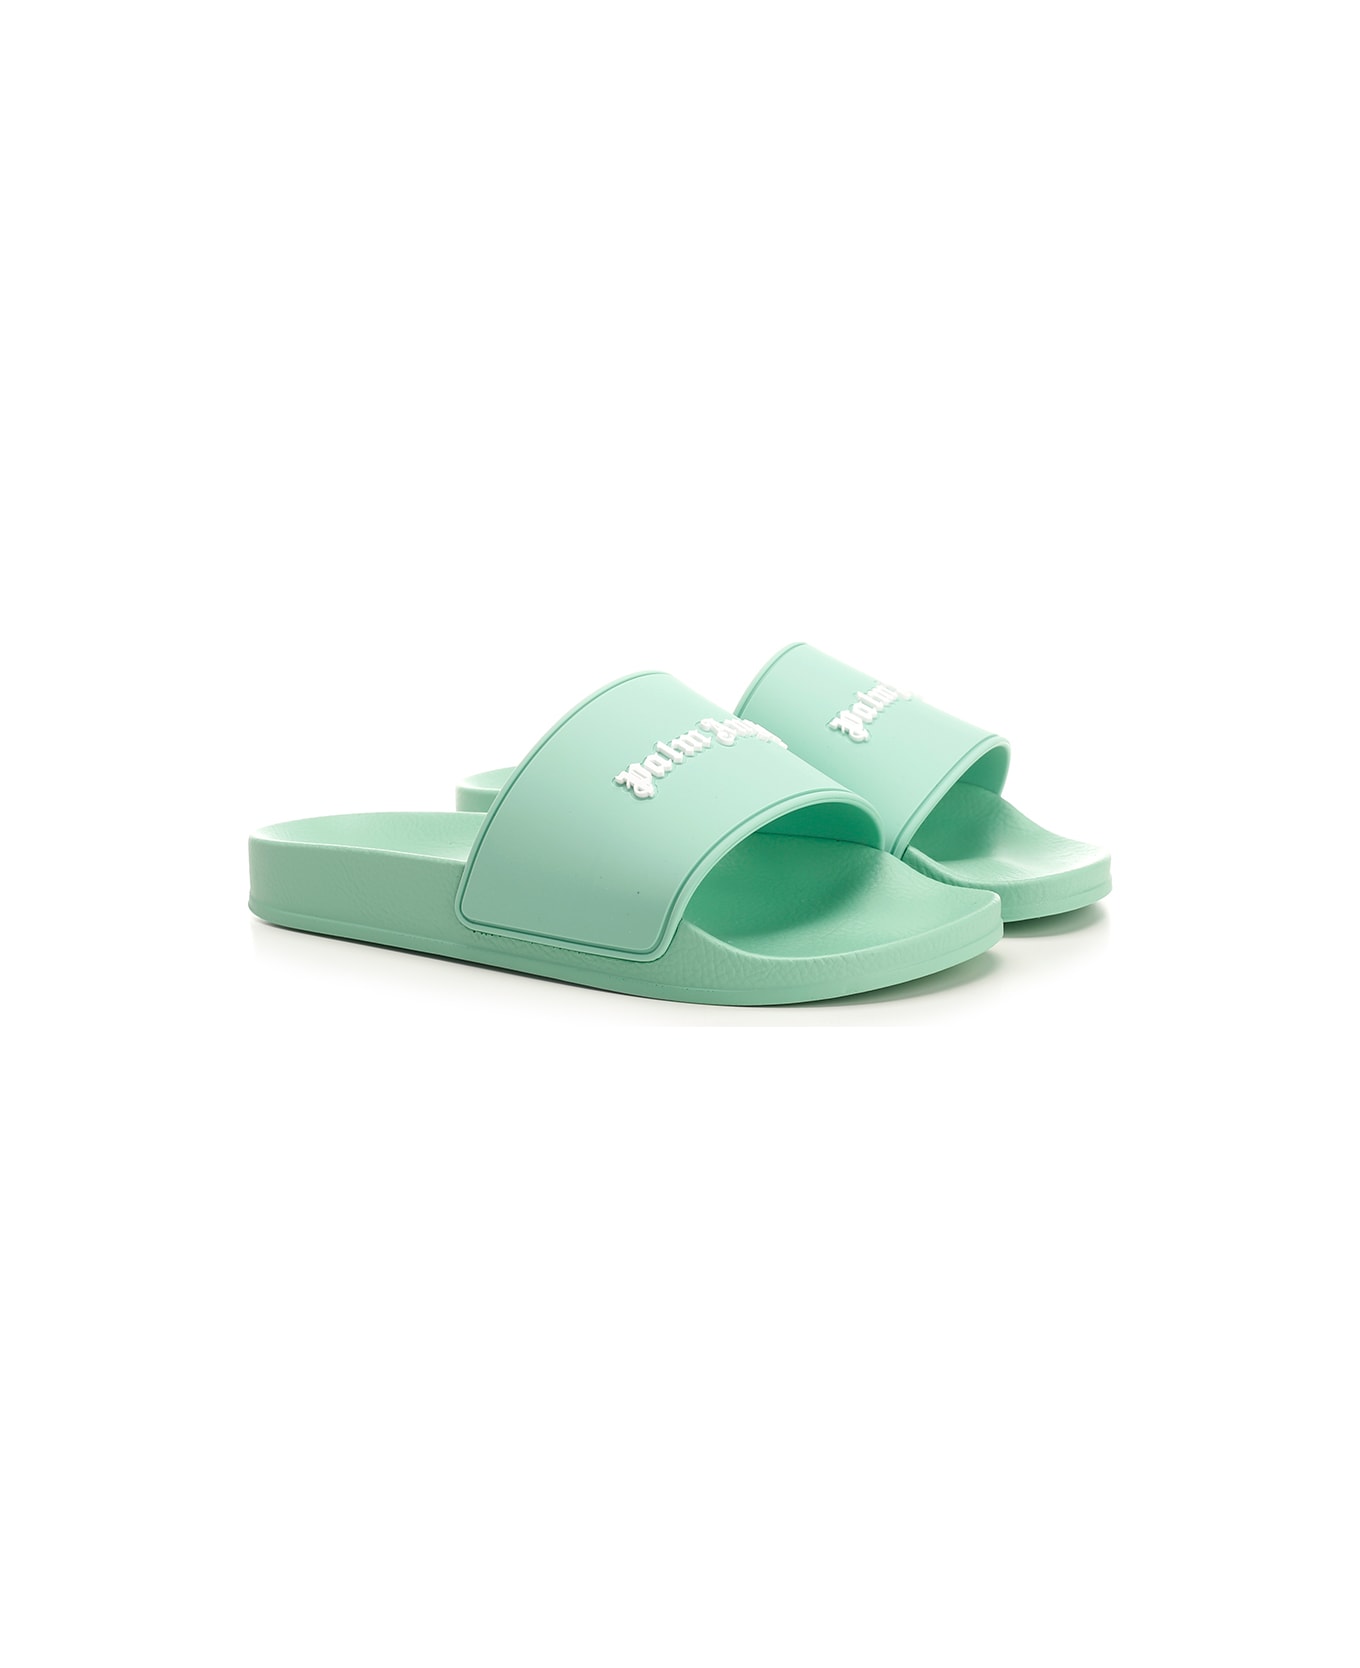 Palm Angels Pool Slippers - Green